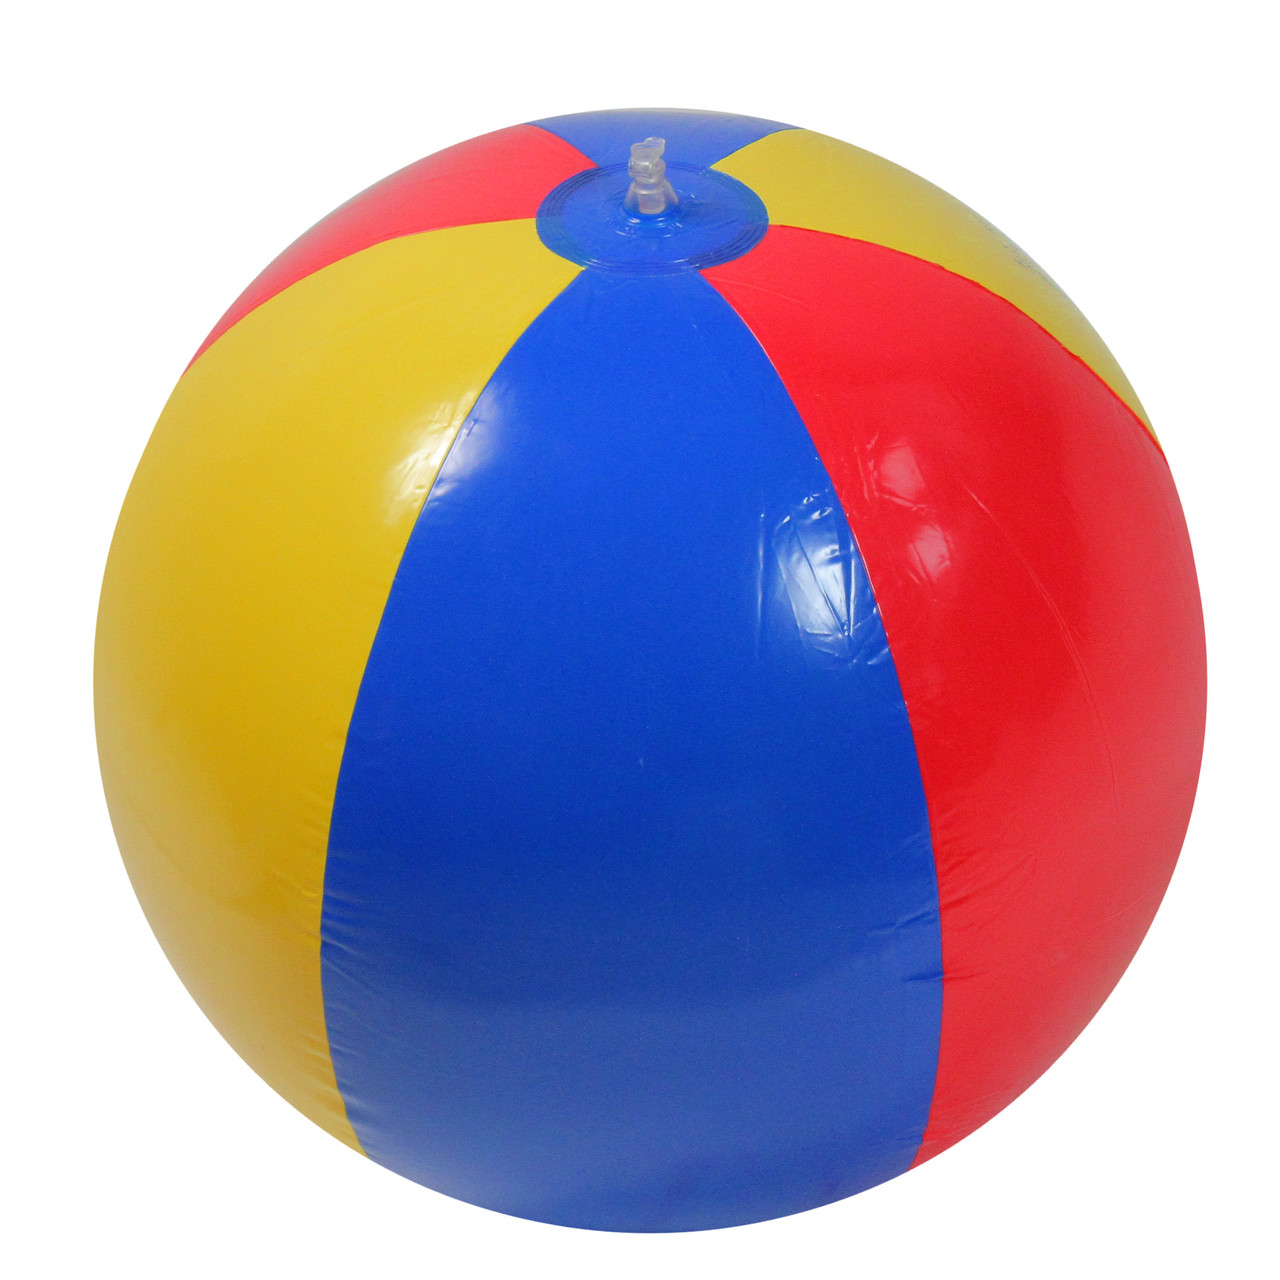 24 BEACH BALLS 16" BEACHBALL BALL POOL PARTY RED WHITE BLUE EXPEDITED SHIPPING 